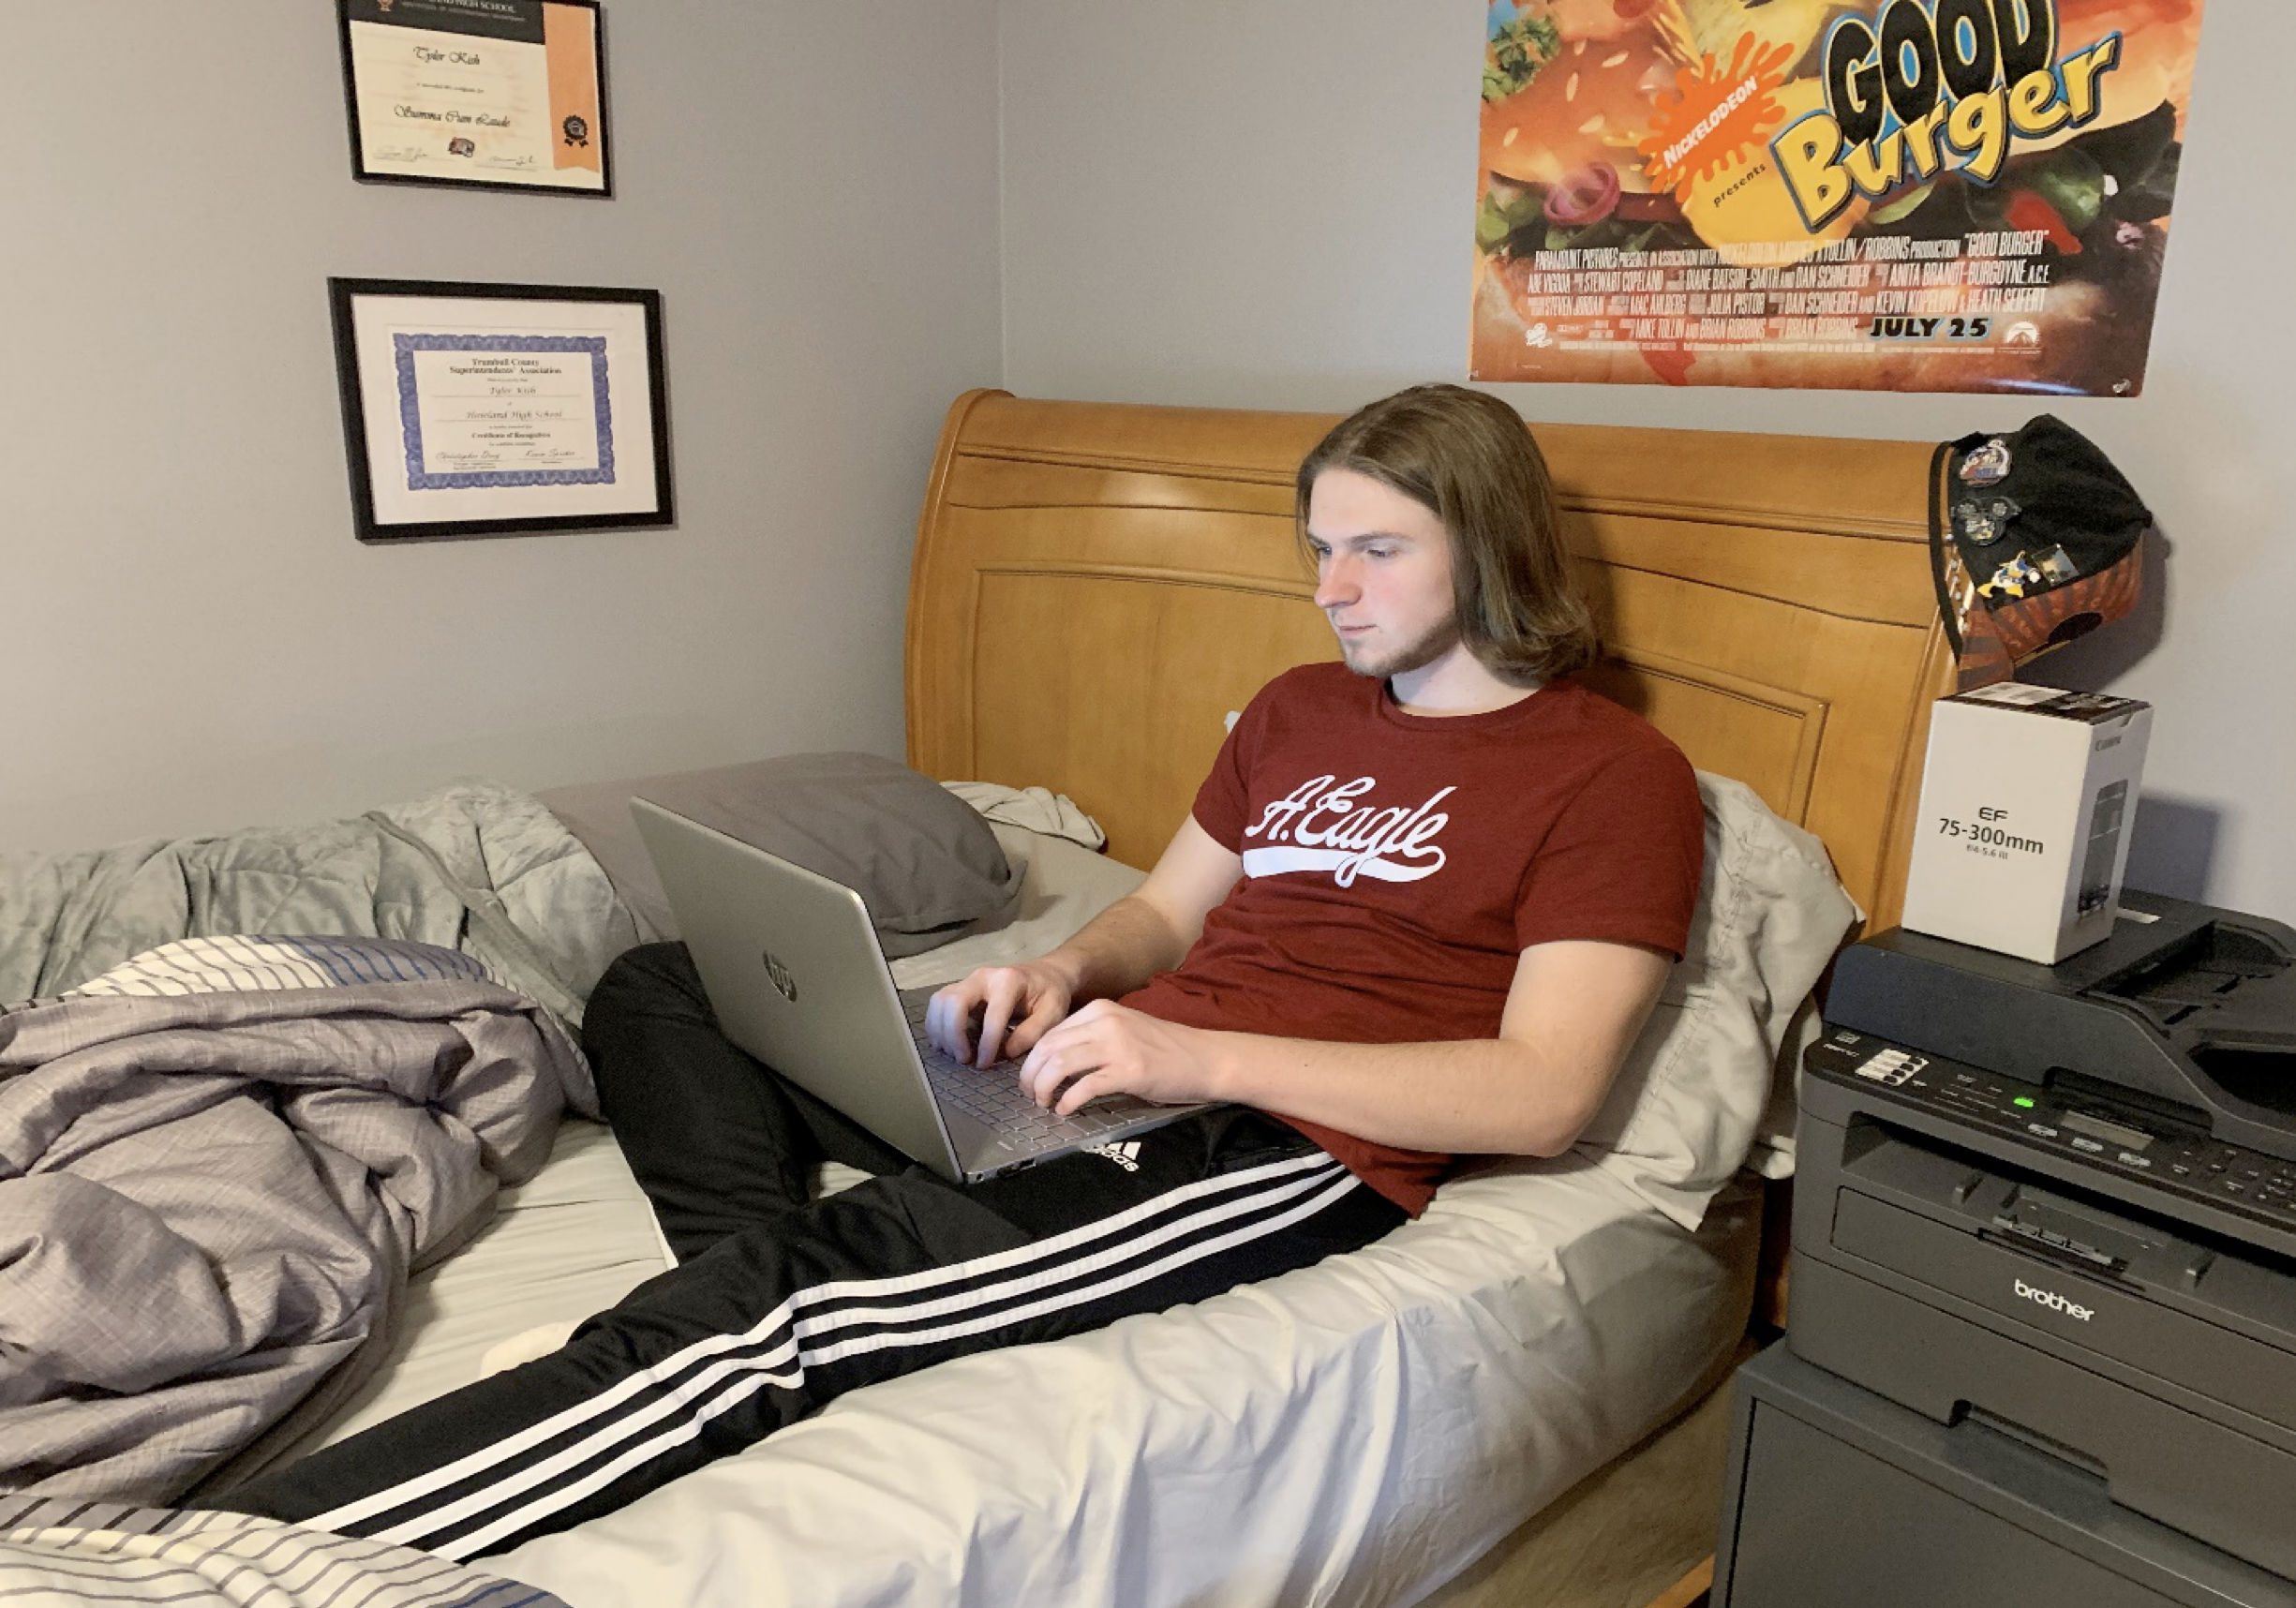 man lounging on bed with laptop